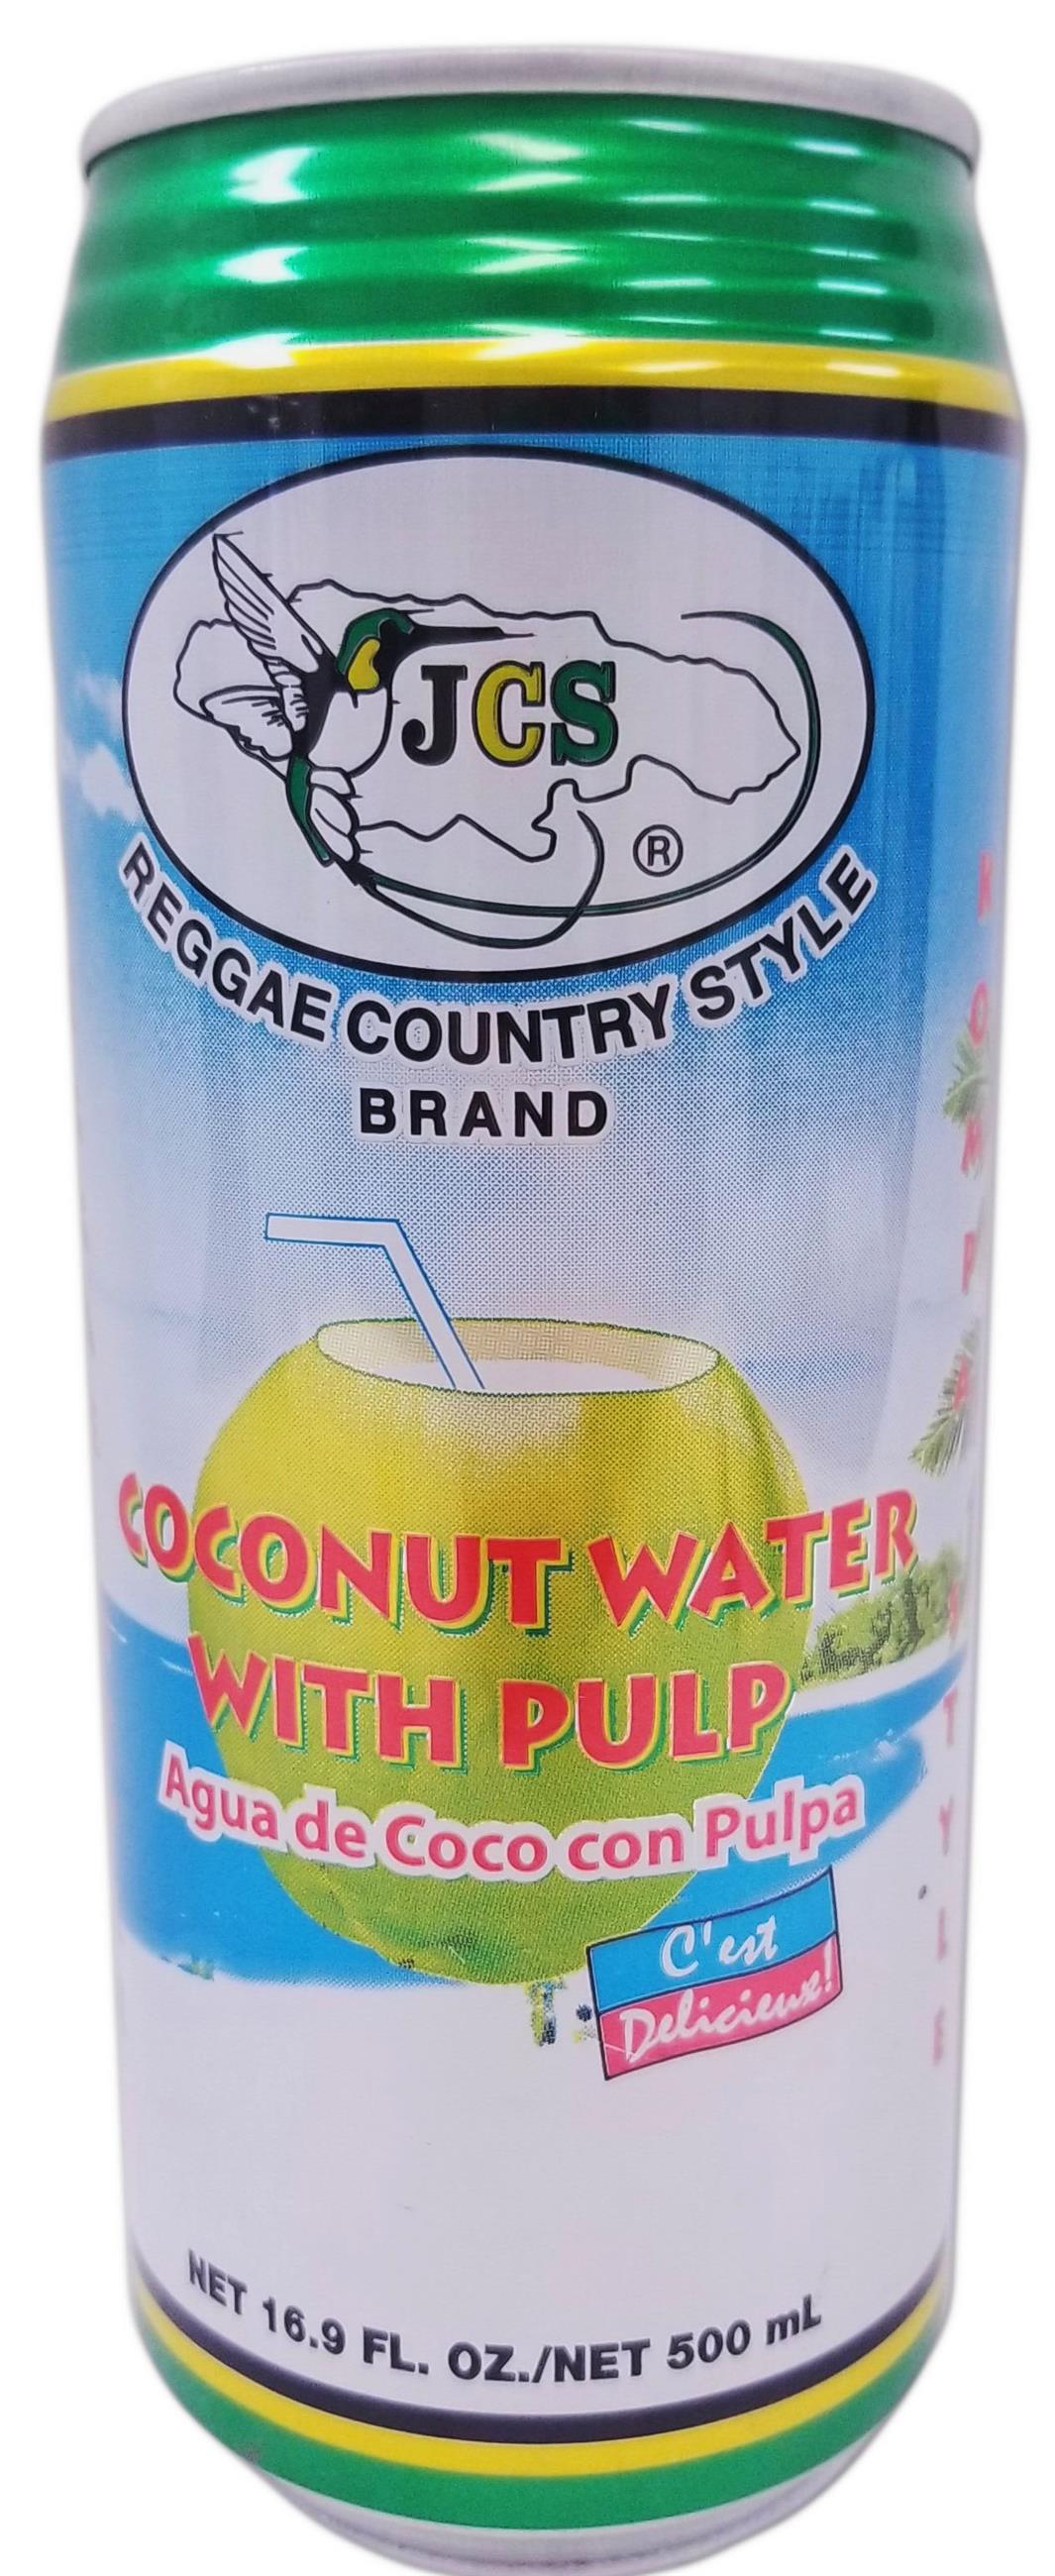 Coco water with pulp 16.9 fl oz JCS193